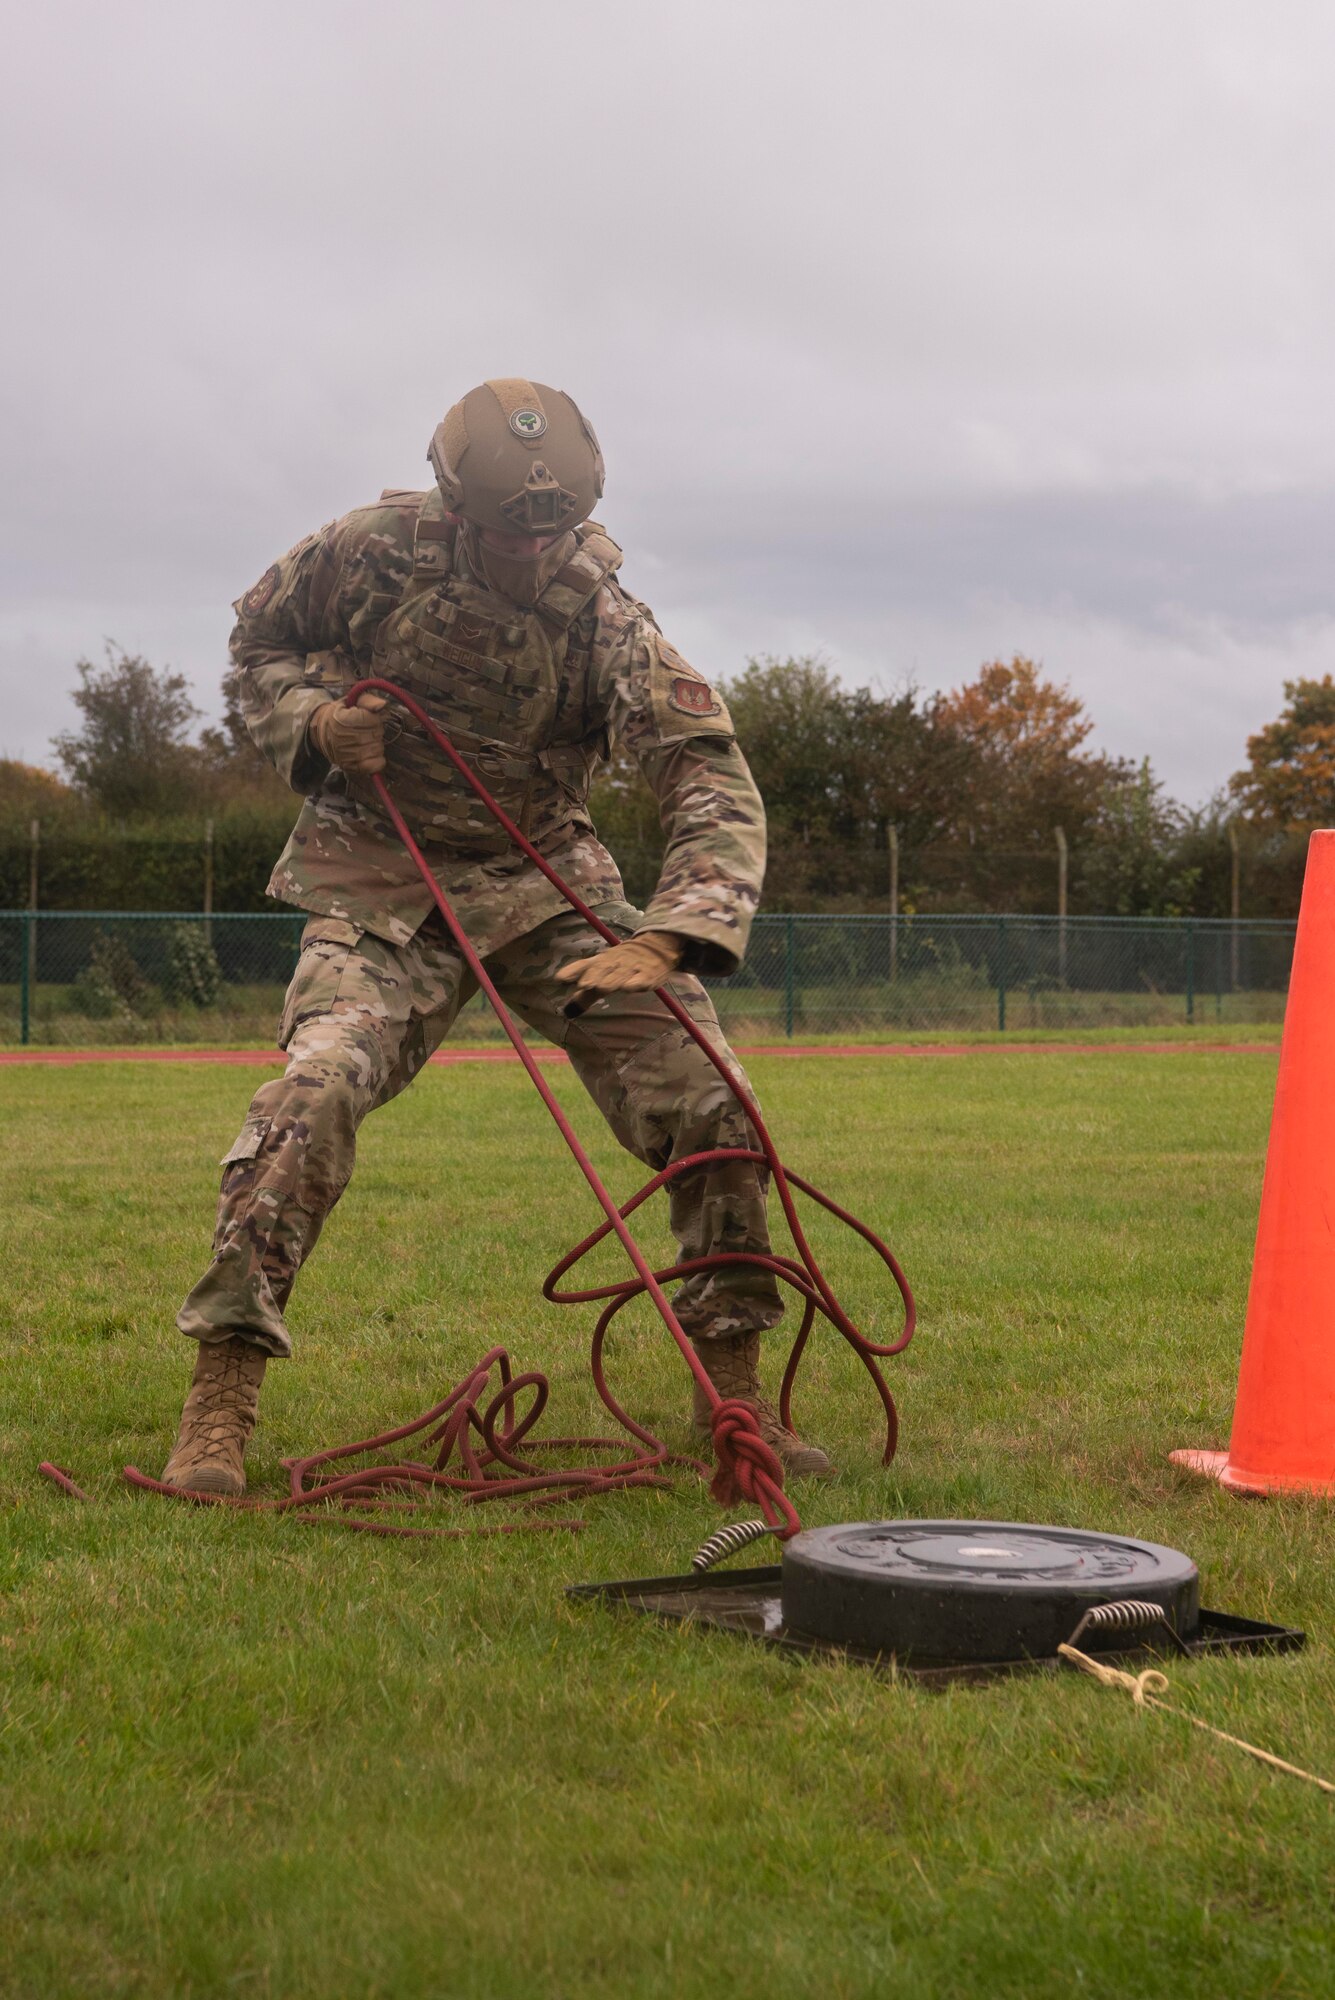 U.S. Air Force Airman 1st Class Adam Weigum, 100th Security Forces Squadron response force member, pulls a weighted sled during the fire muster competition at Royal Air Force Mildenhall, England, Oct. 8, 2020. The fire muster consisted of physical challenges and was held to increase fire prevention awareness. (U.S. Air Force photo by Airman 1st Class Joseph Barron)